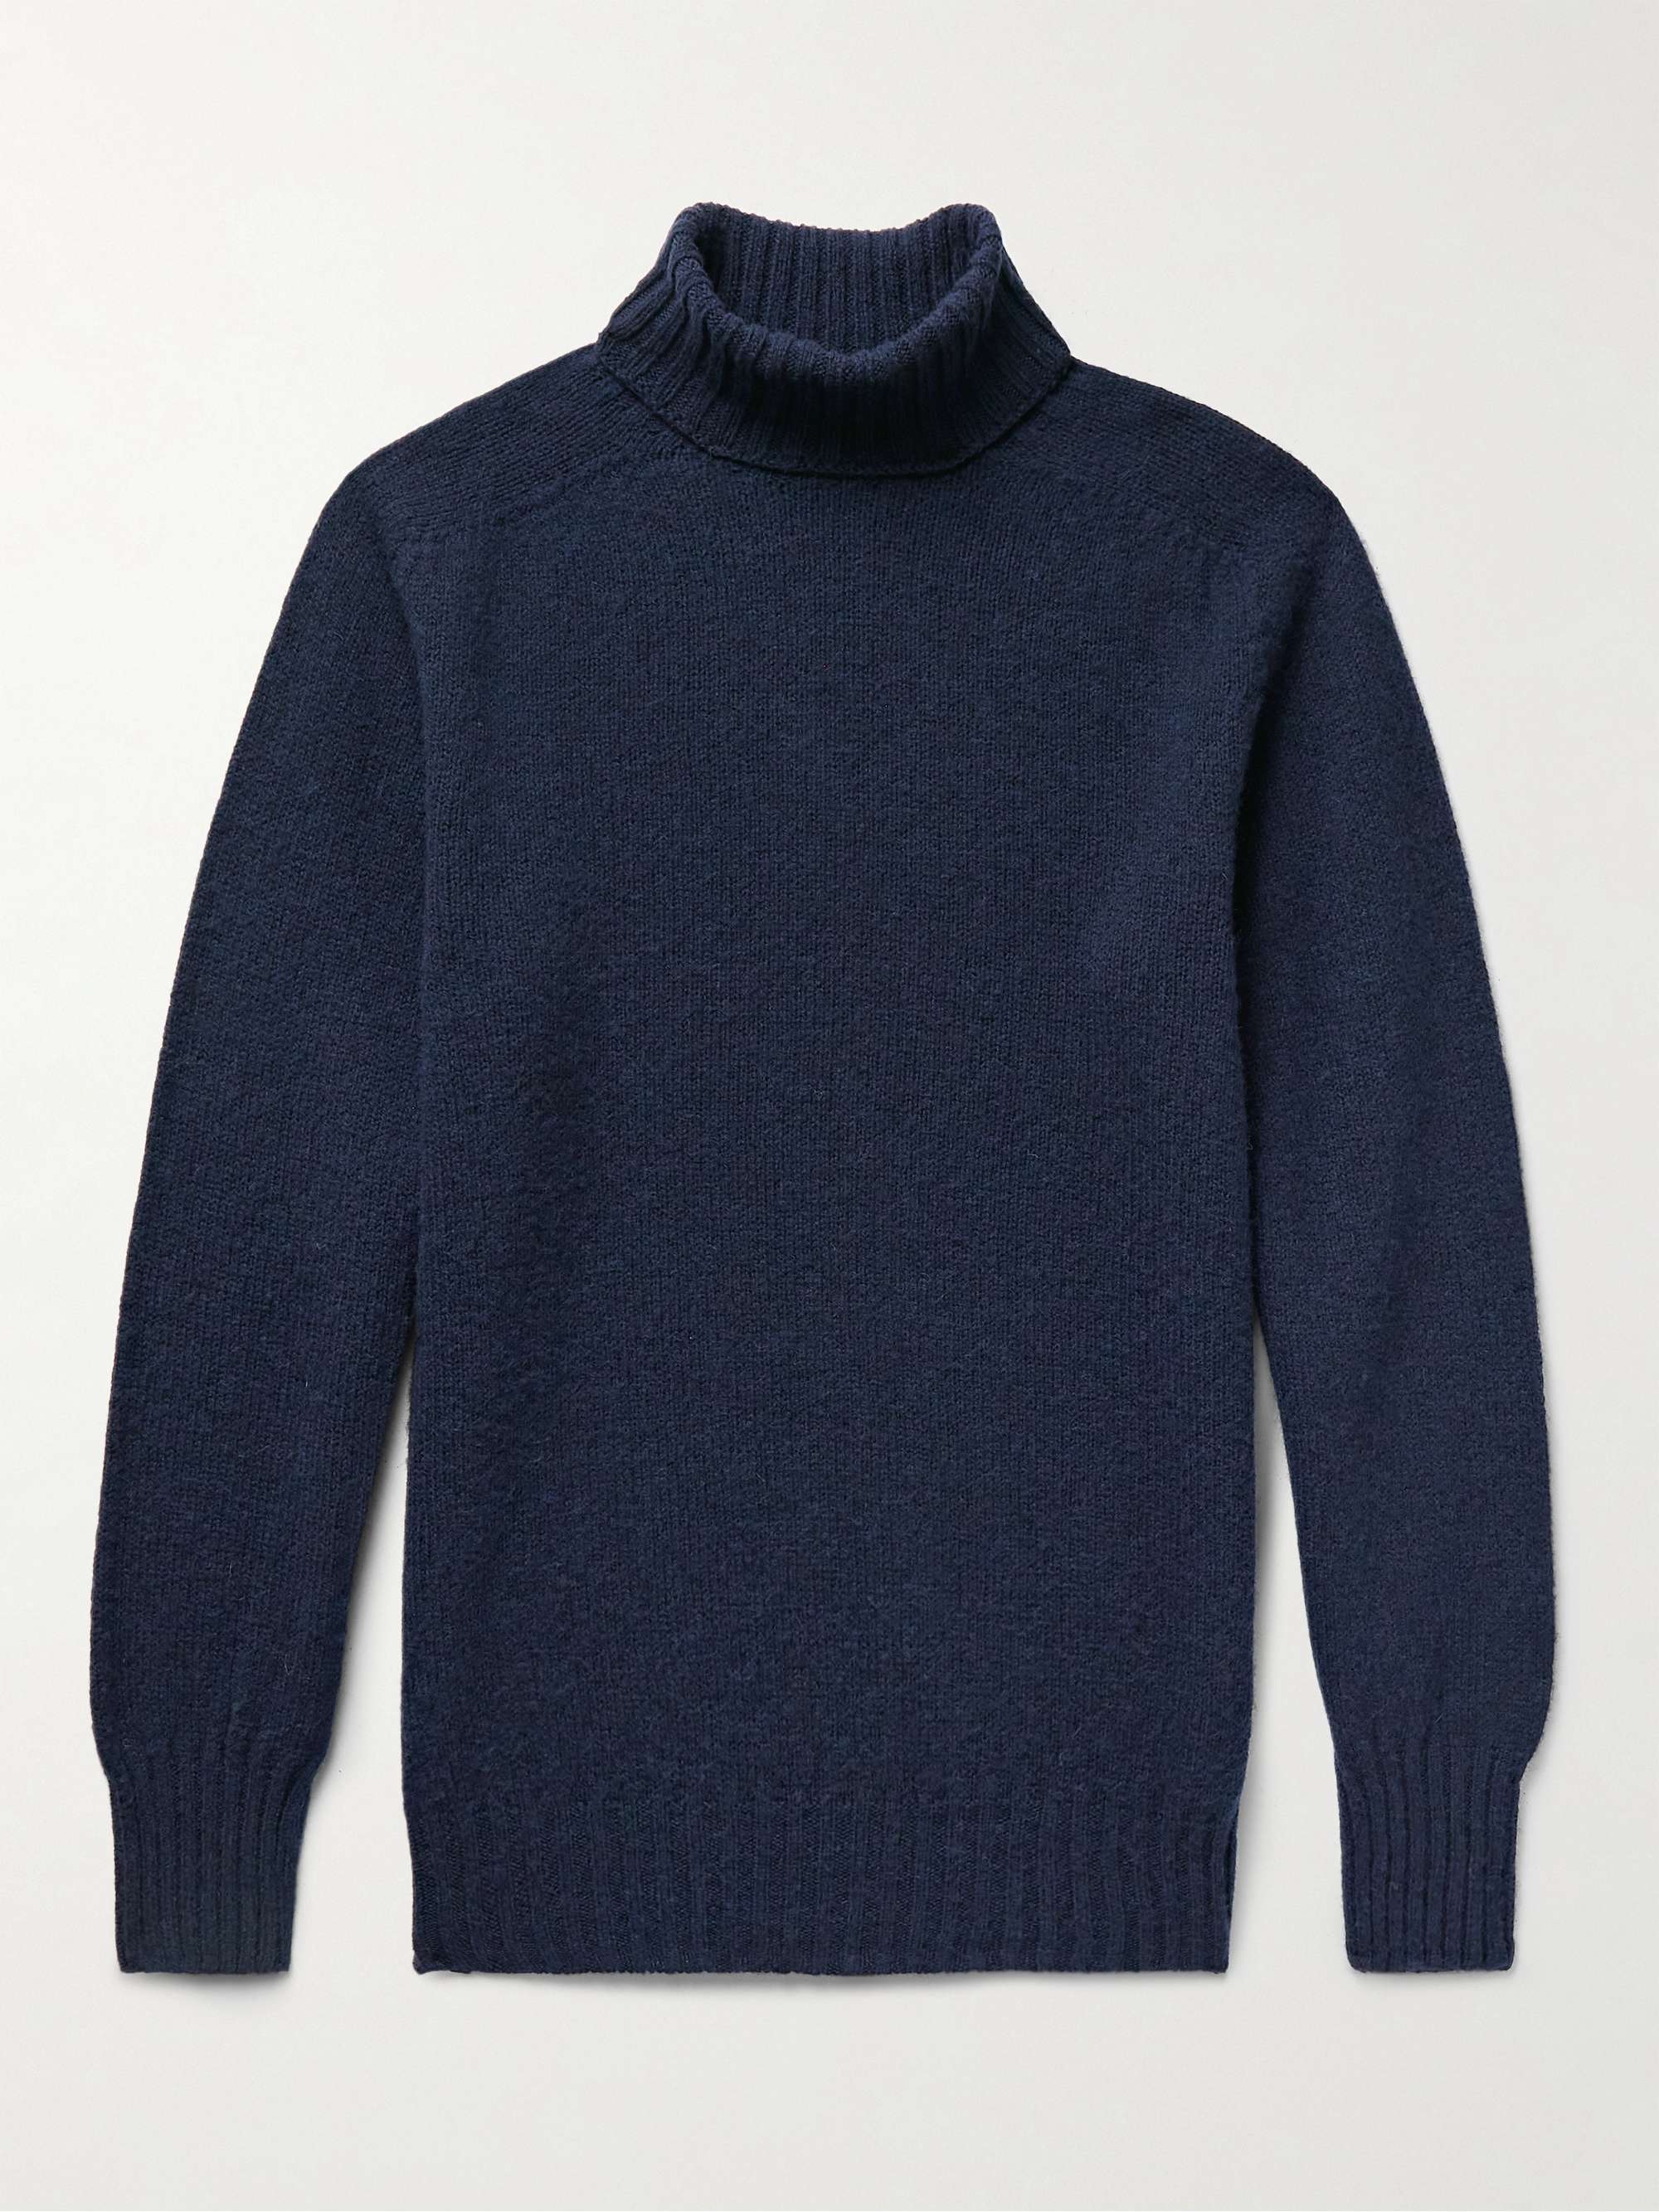 HOWLIN' Sylvester Slim-Fit Wool Rollneck Sweater